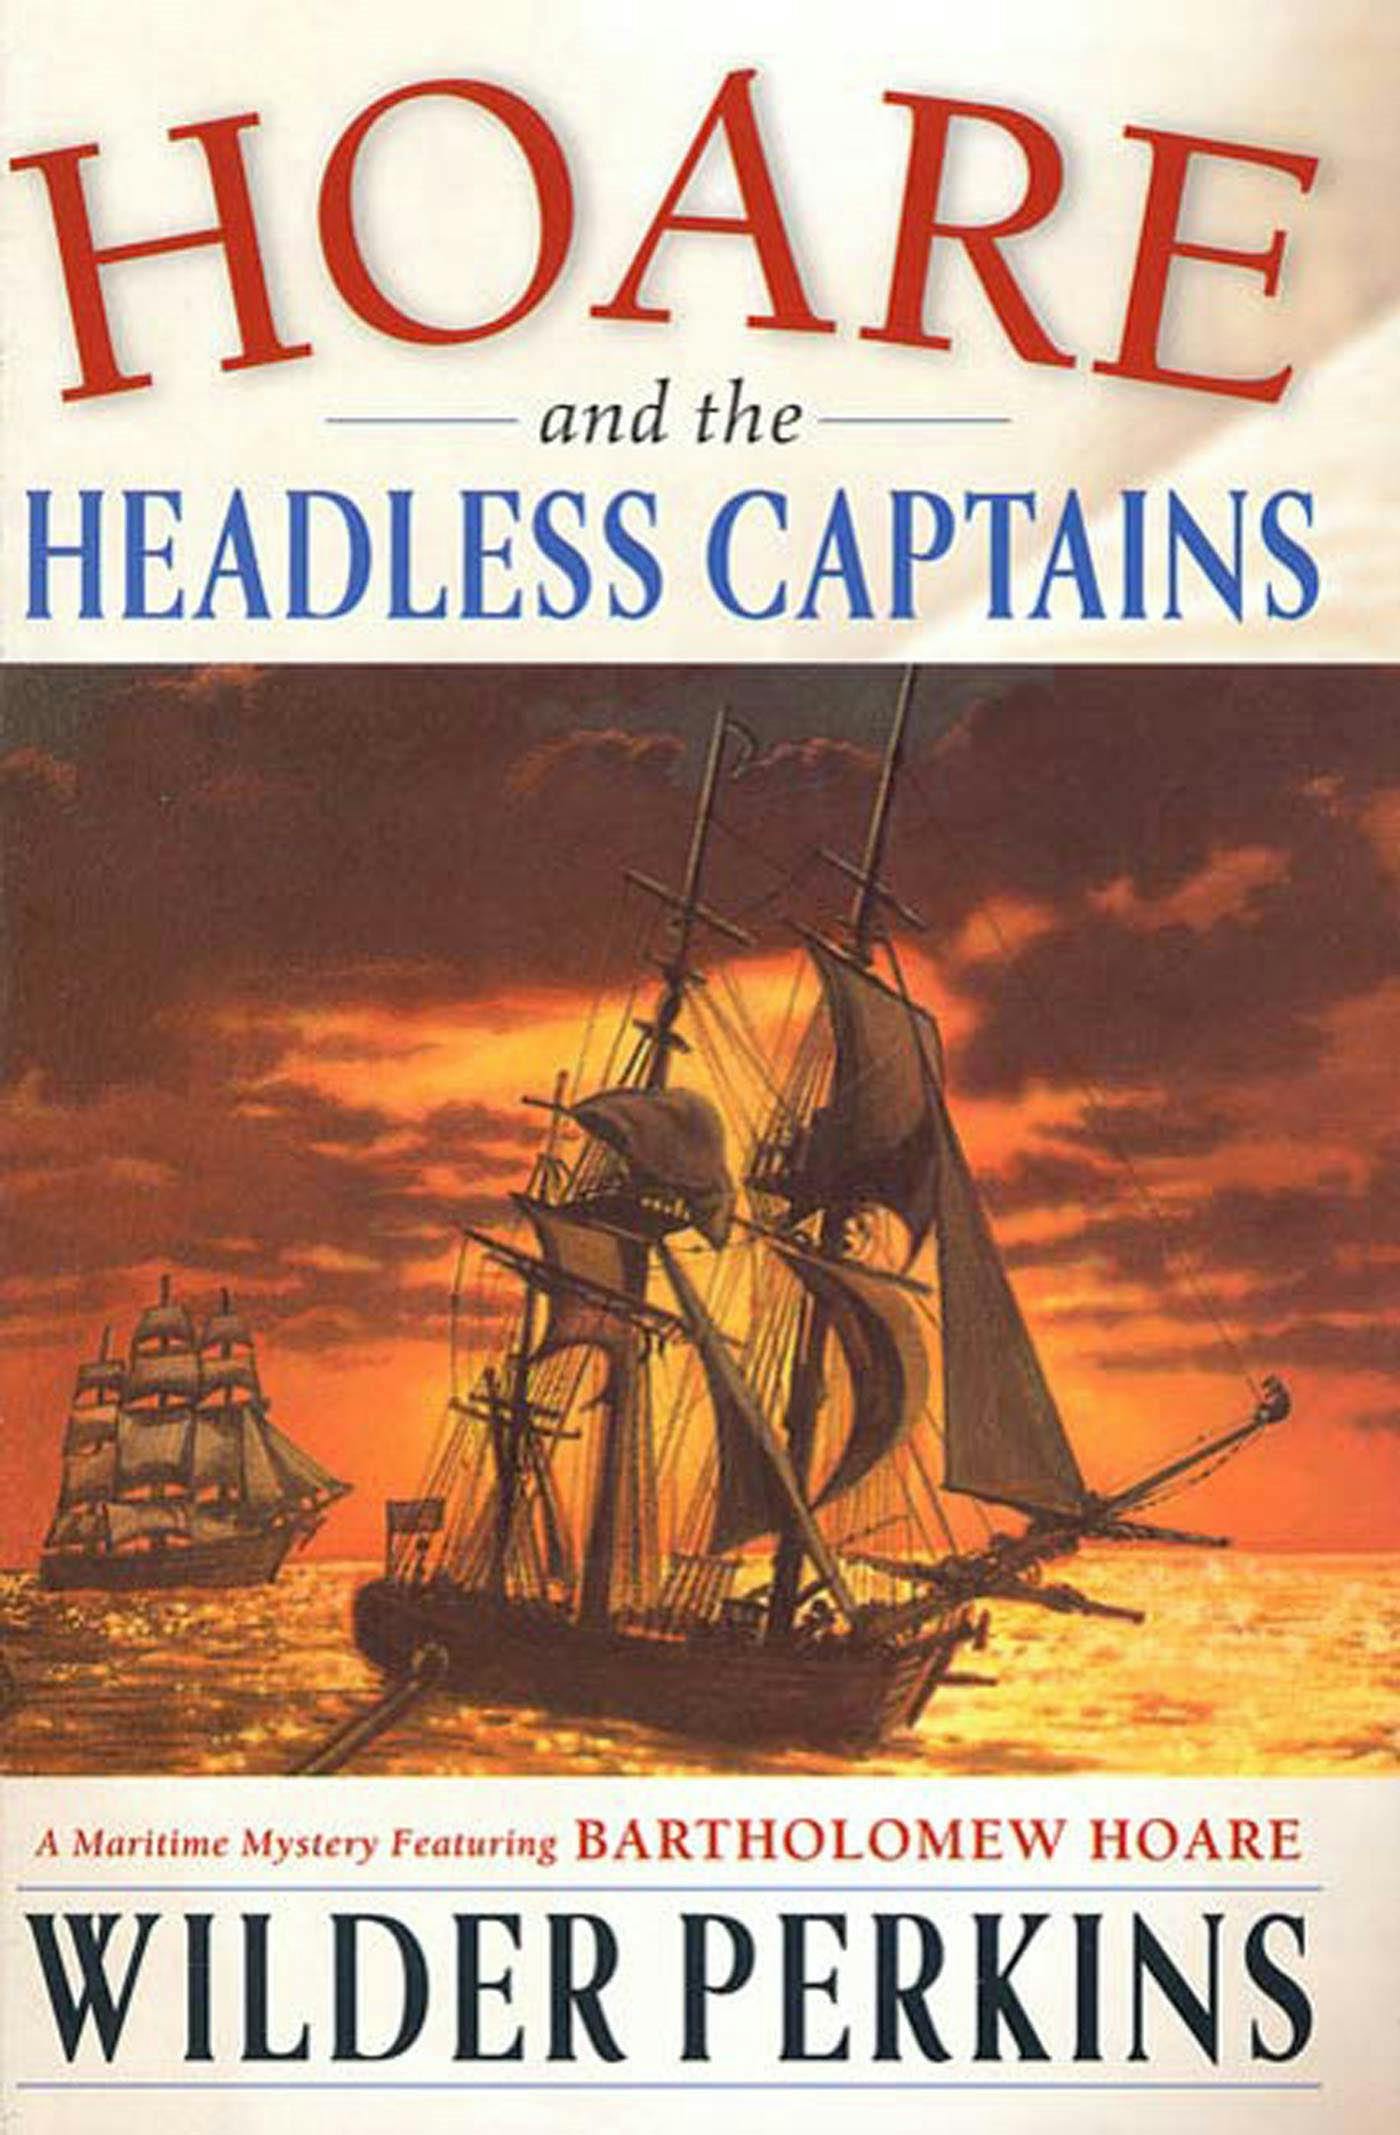 Hoare and the Headless Captains